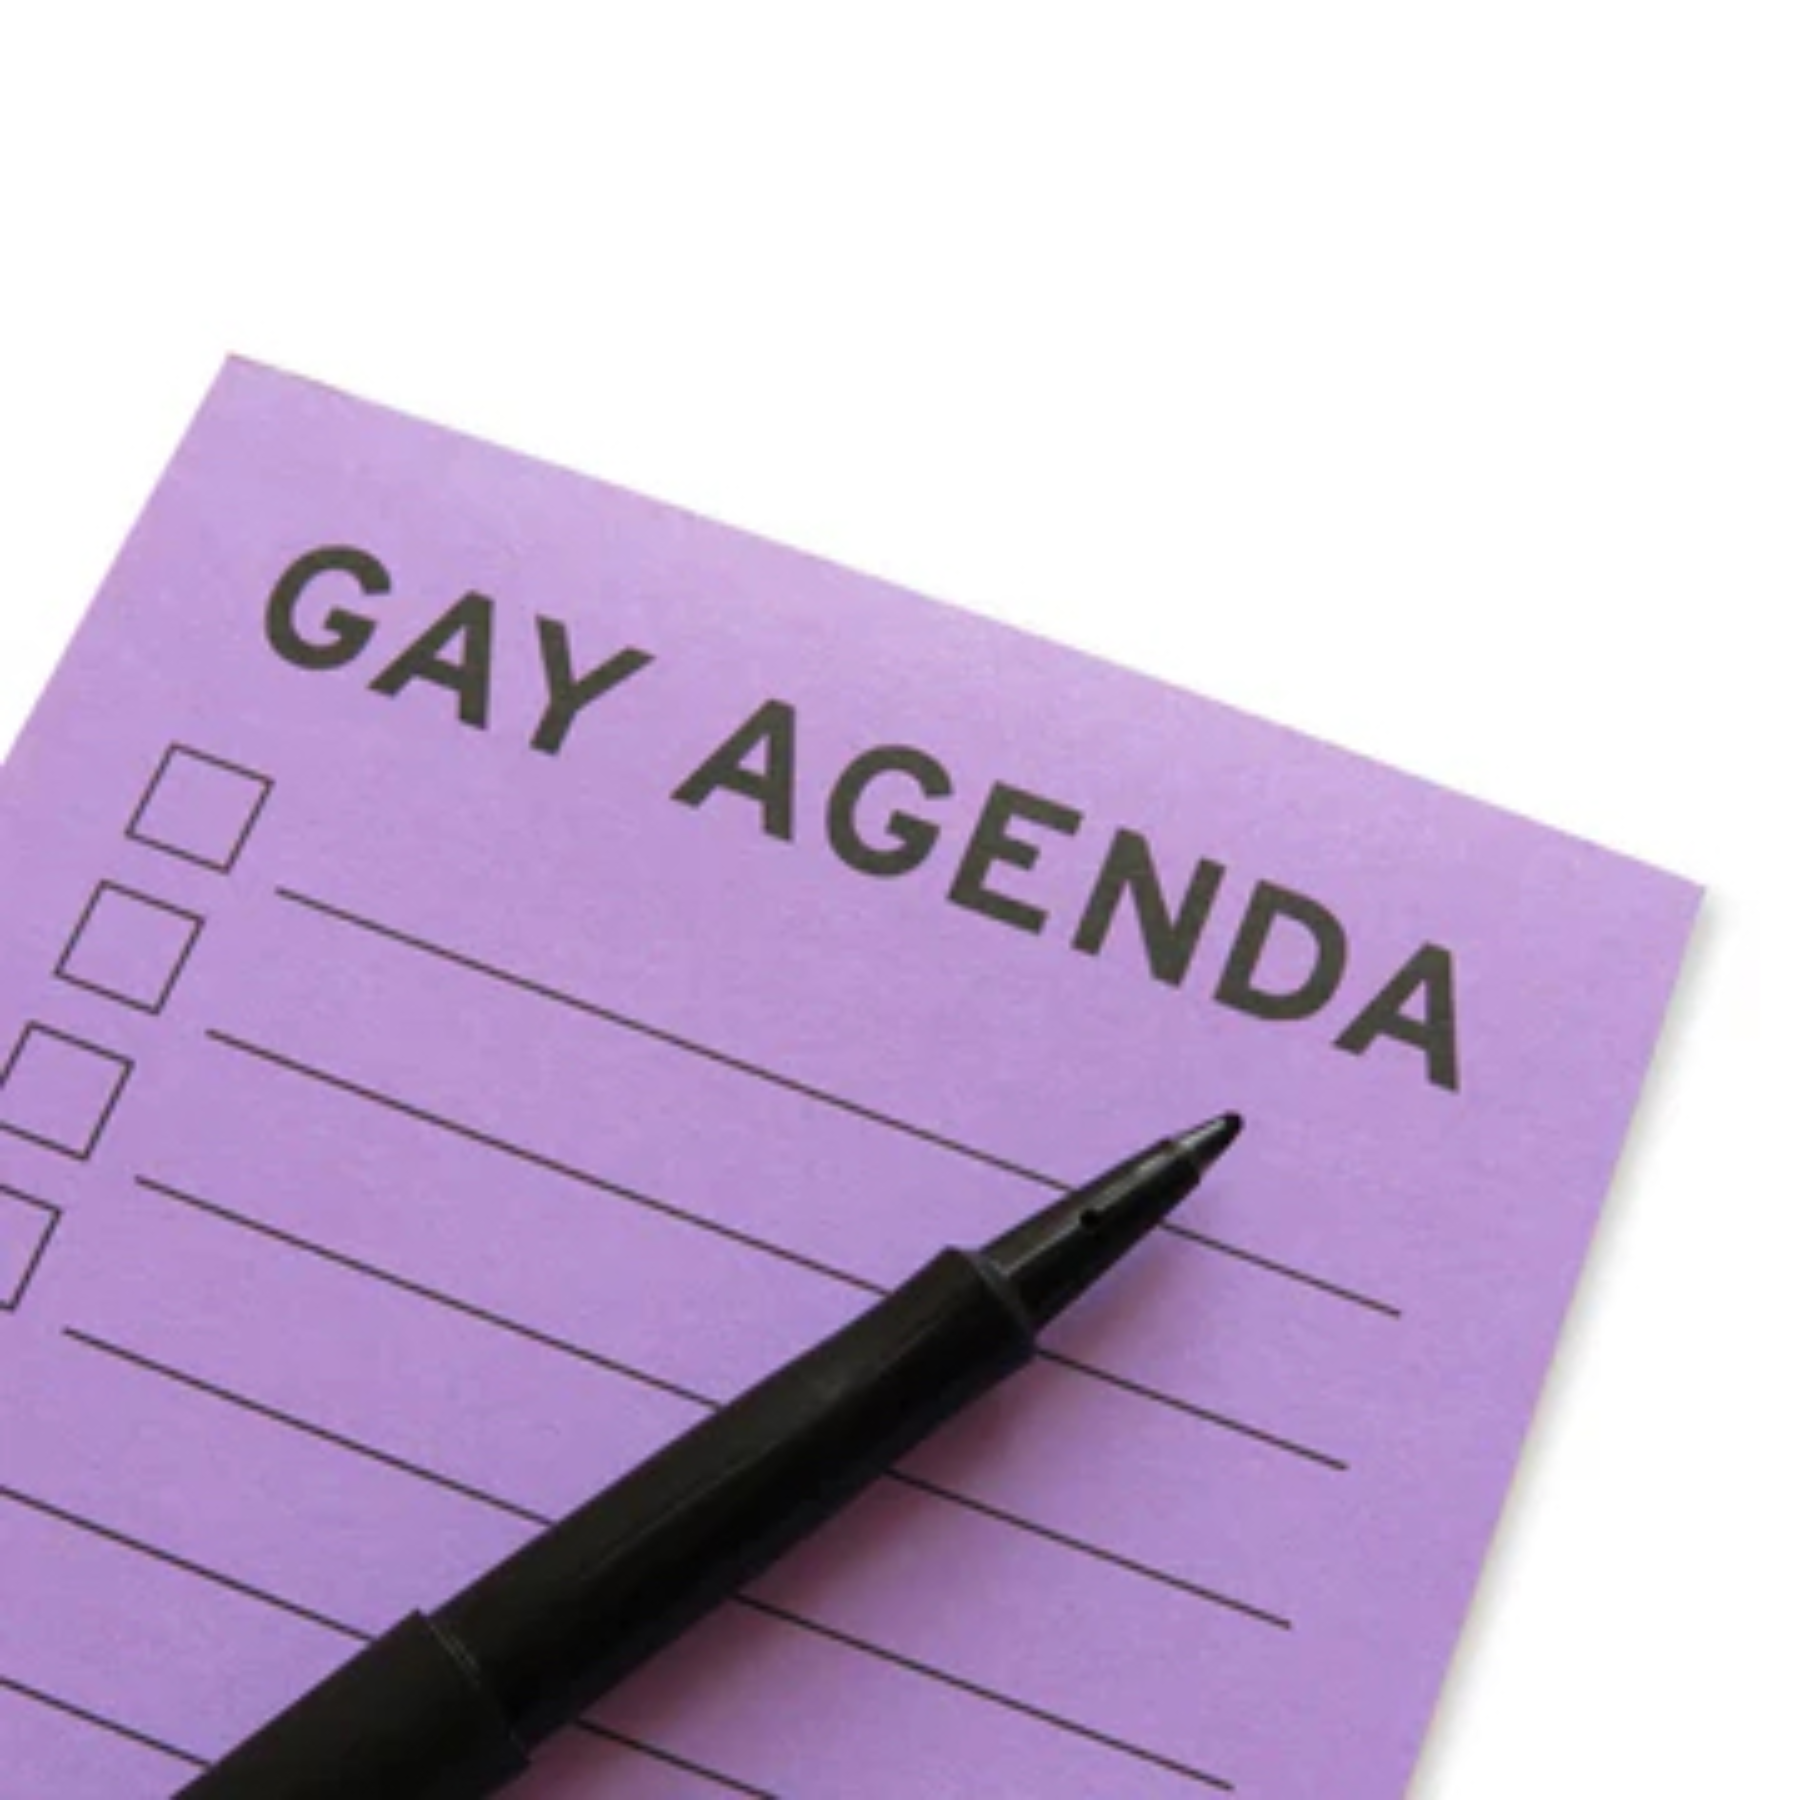 GAY AGENDA LIST PAD by WORD FOR WORD